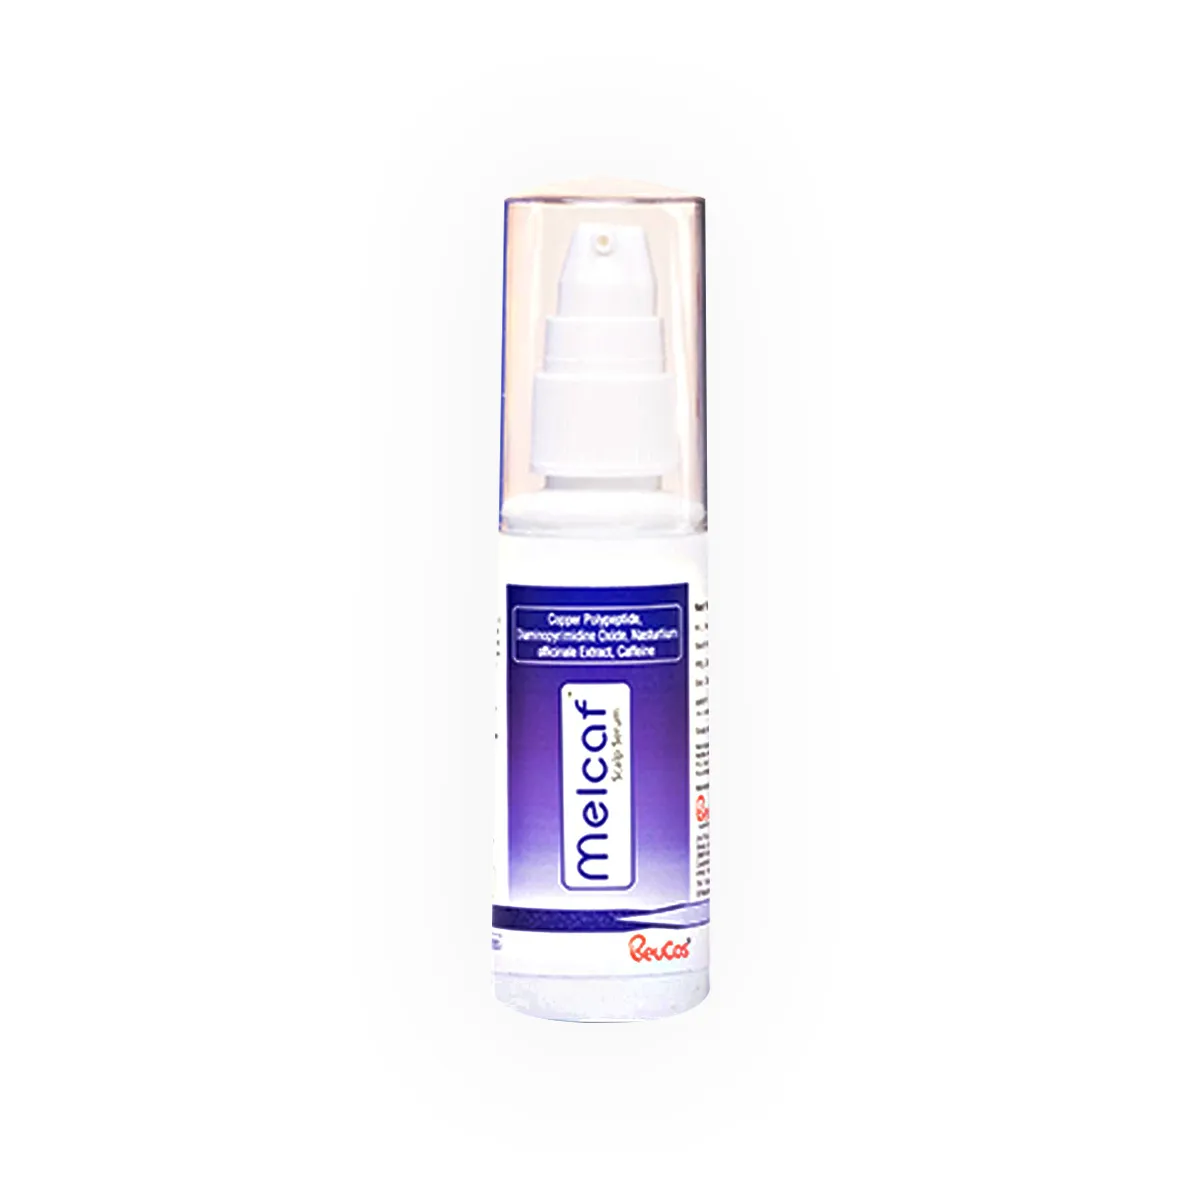 First product image of Melcaf X Scalp Serum 50ml